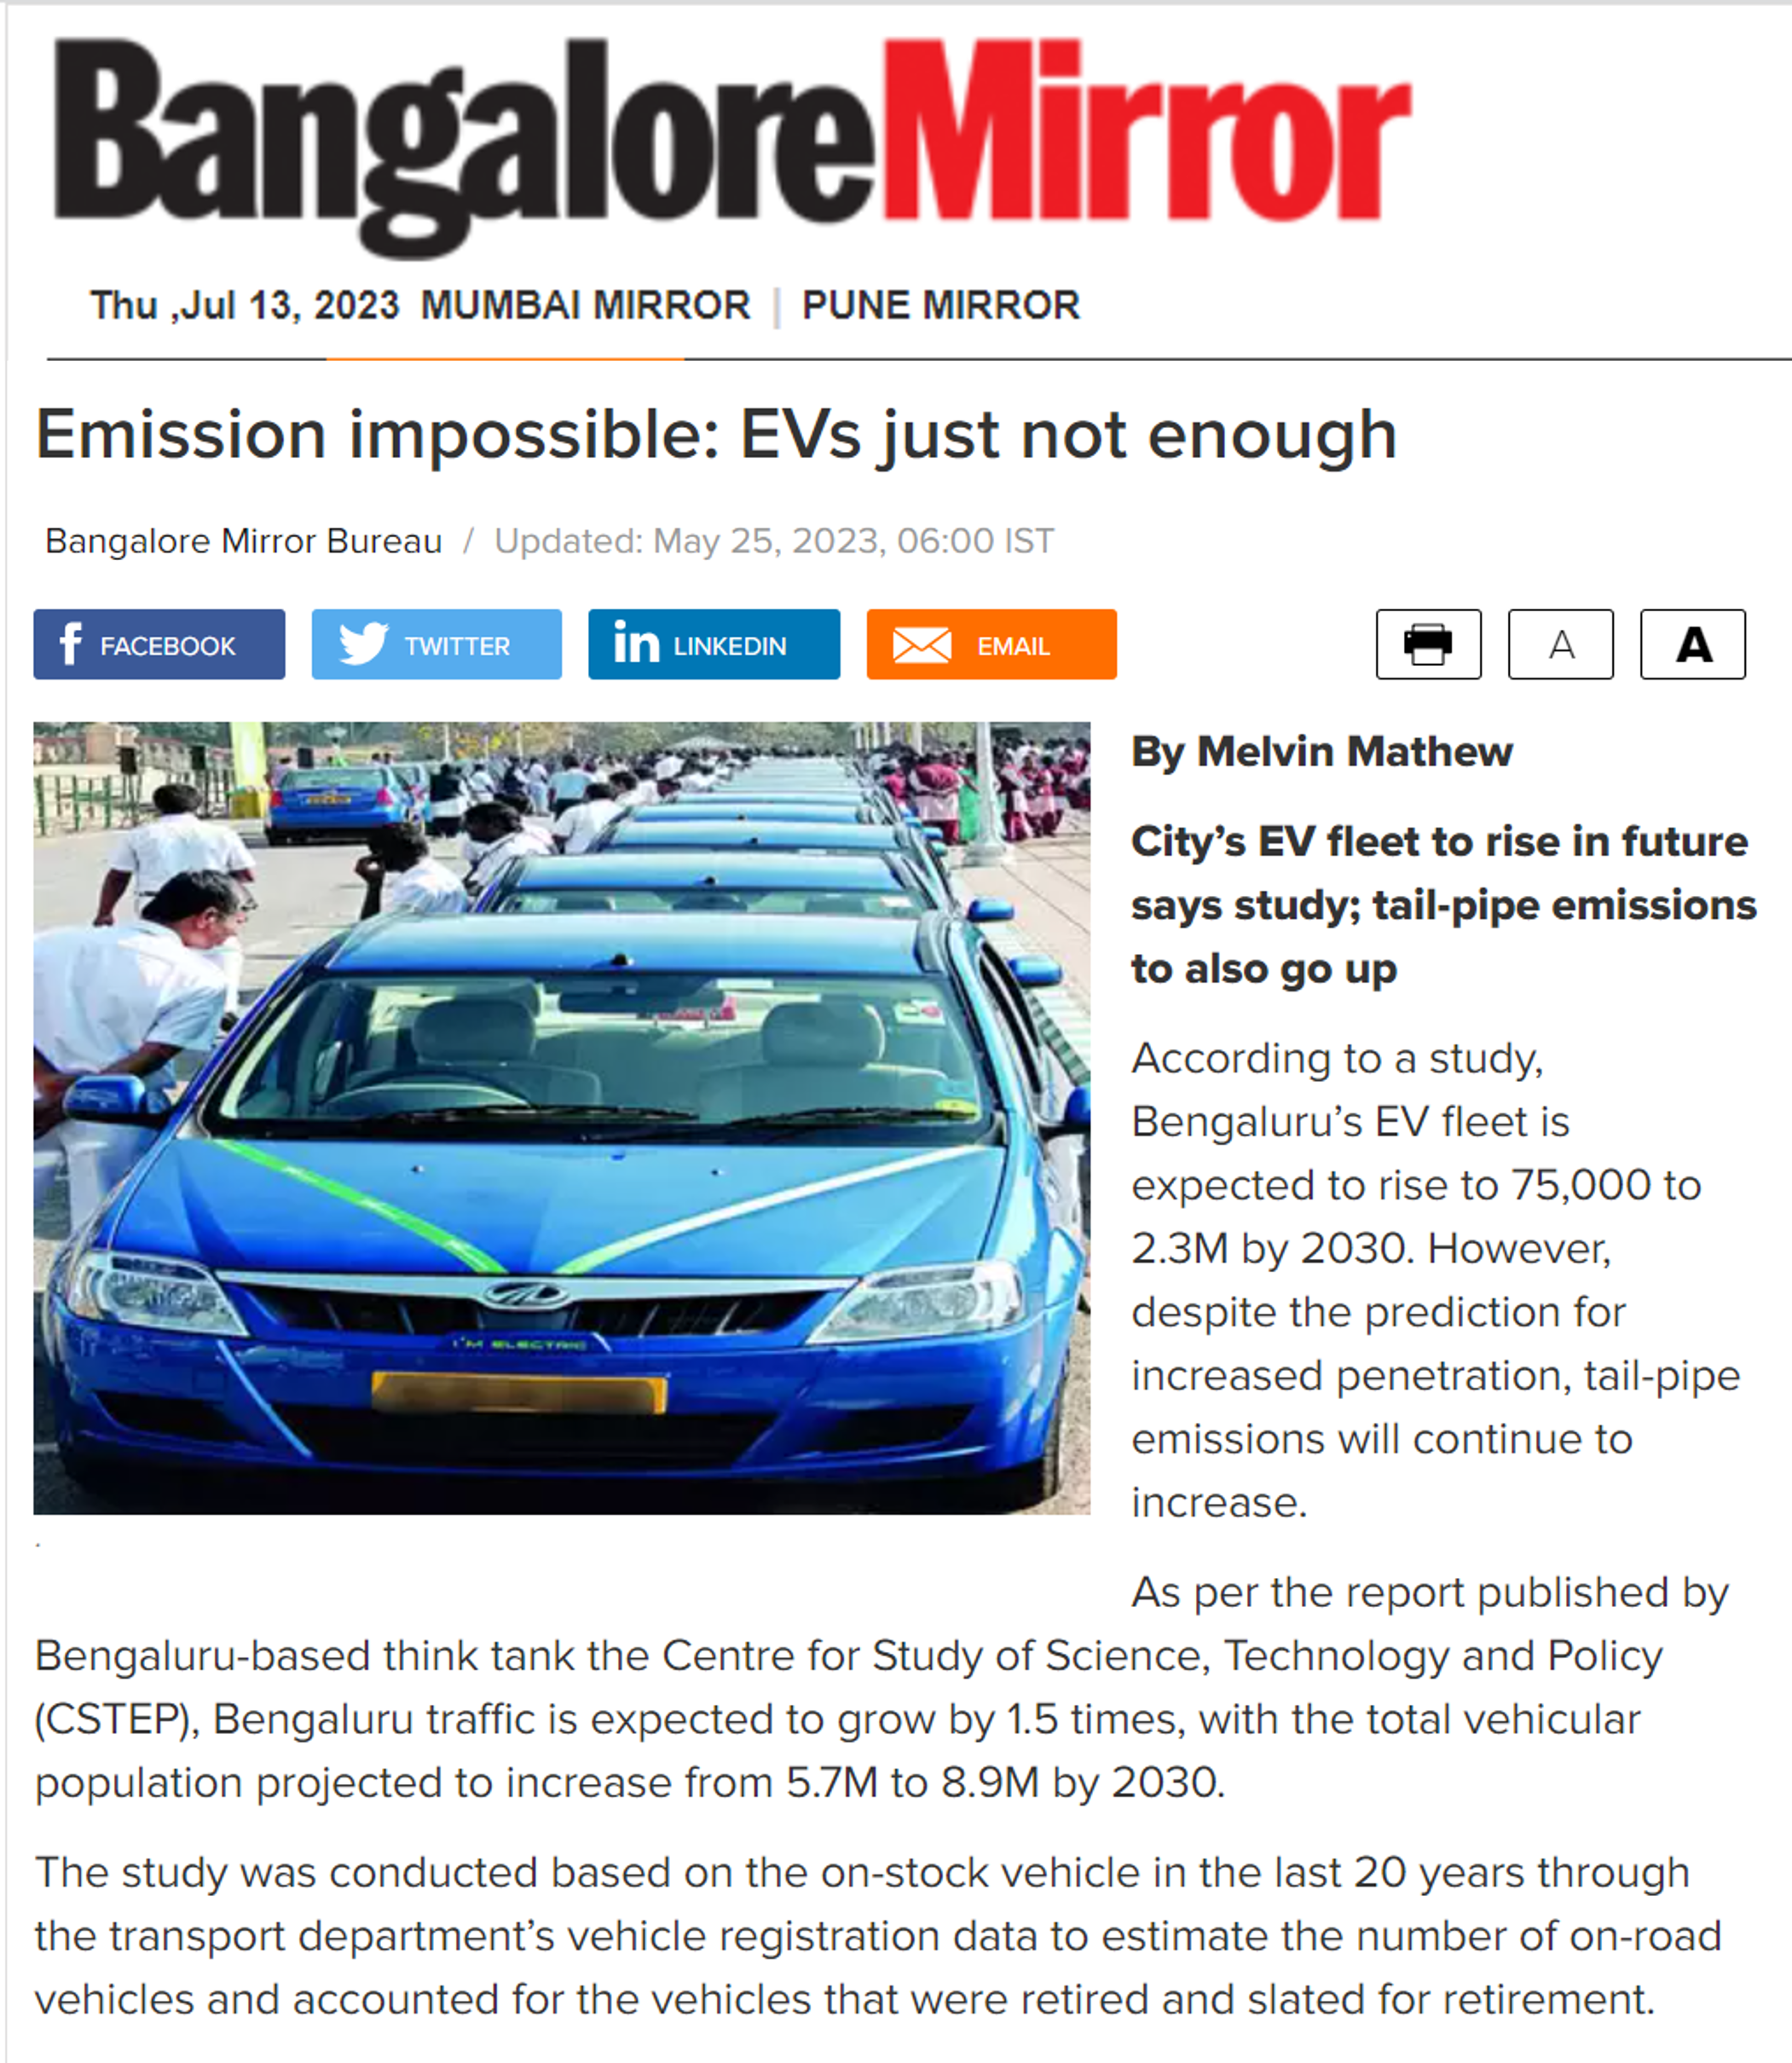 CSTEP’s study on the impact of electric vehicles on vehicular emissions covered by Bangalore Mirror